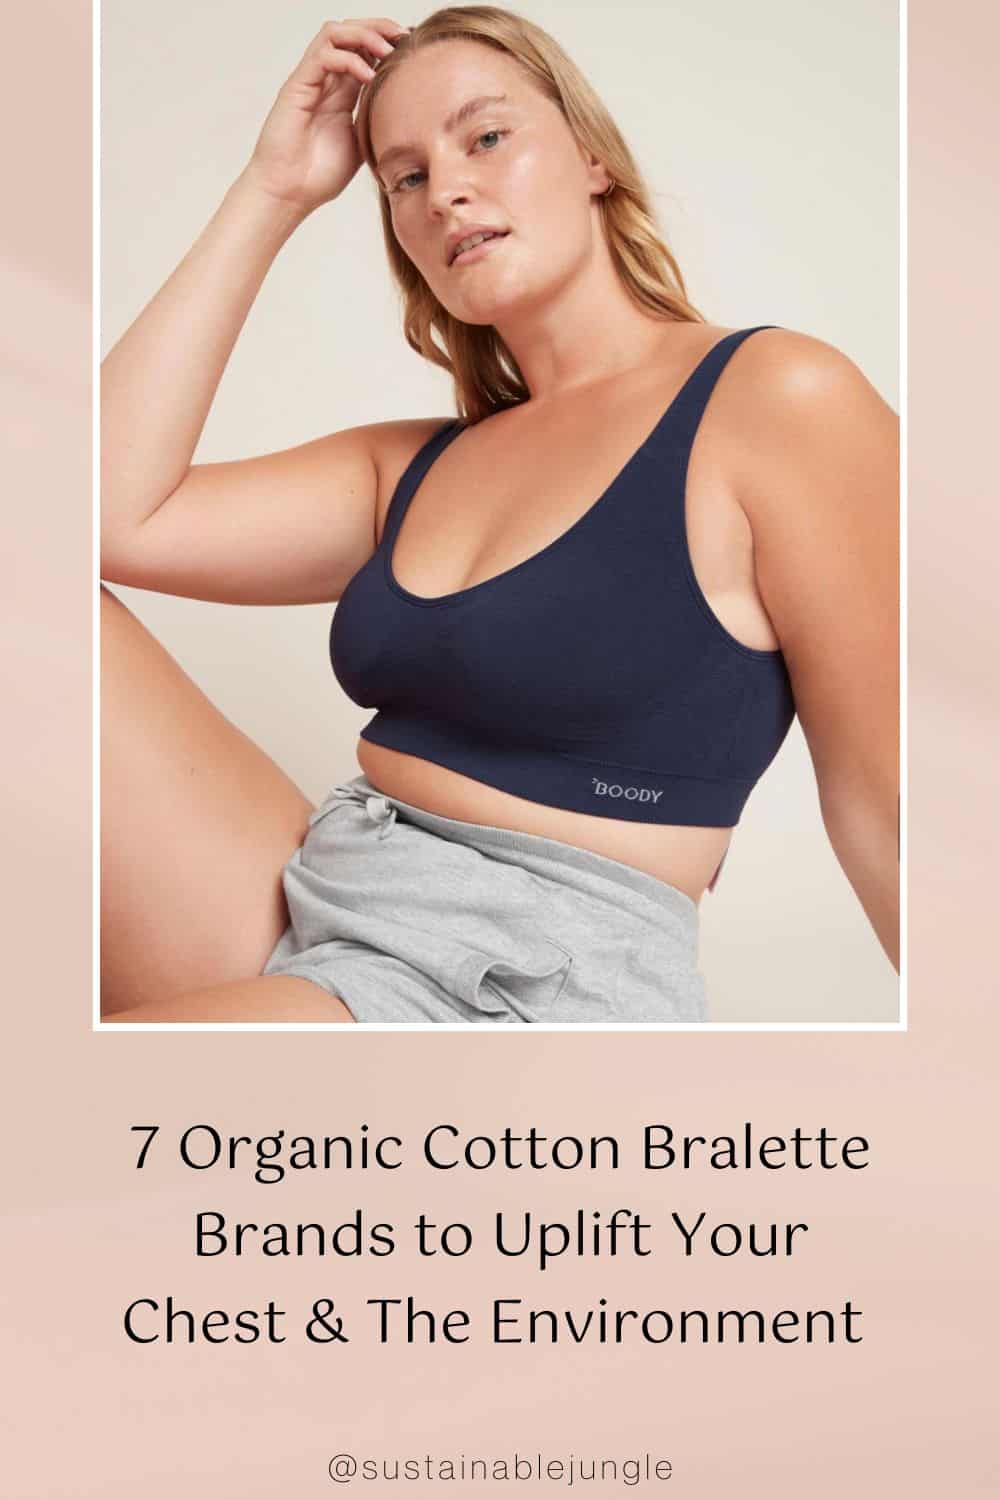 7 Organic Cotton Bralette Brands to Uplift Your Chest & The Environment Image by Boody #organiccottonbralette #organiccottonbralettes #wirelessorganiccottonbralettes #organicbralettes #sustainablebralettes #wirelessorganiccottonbralette #sustainablejungle